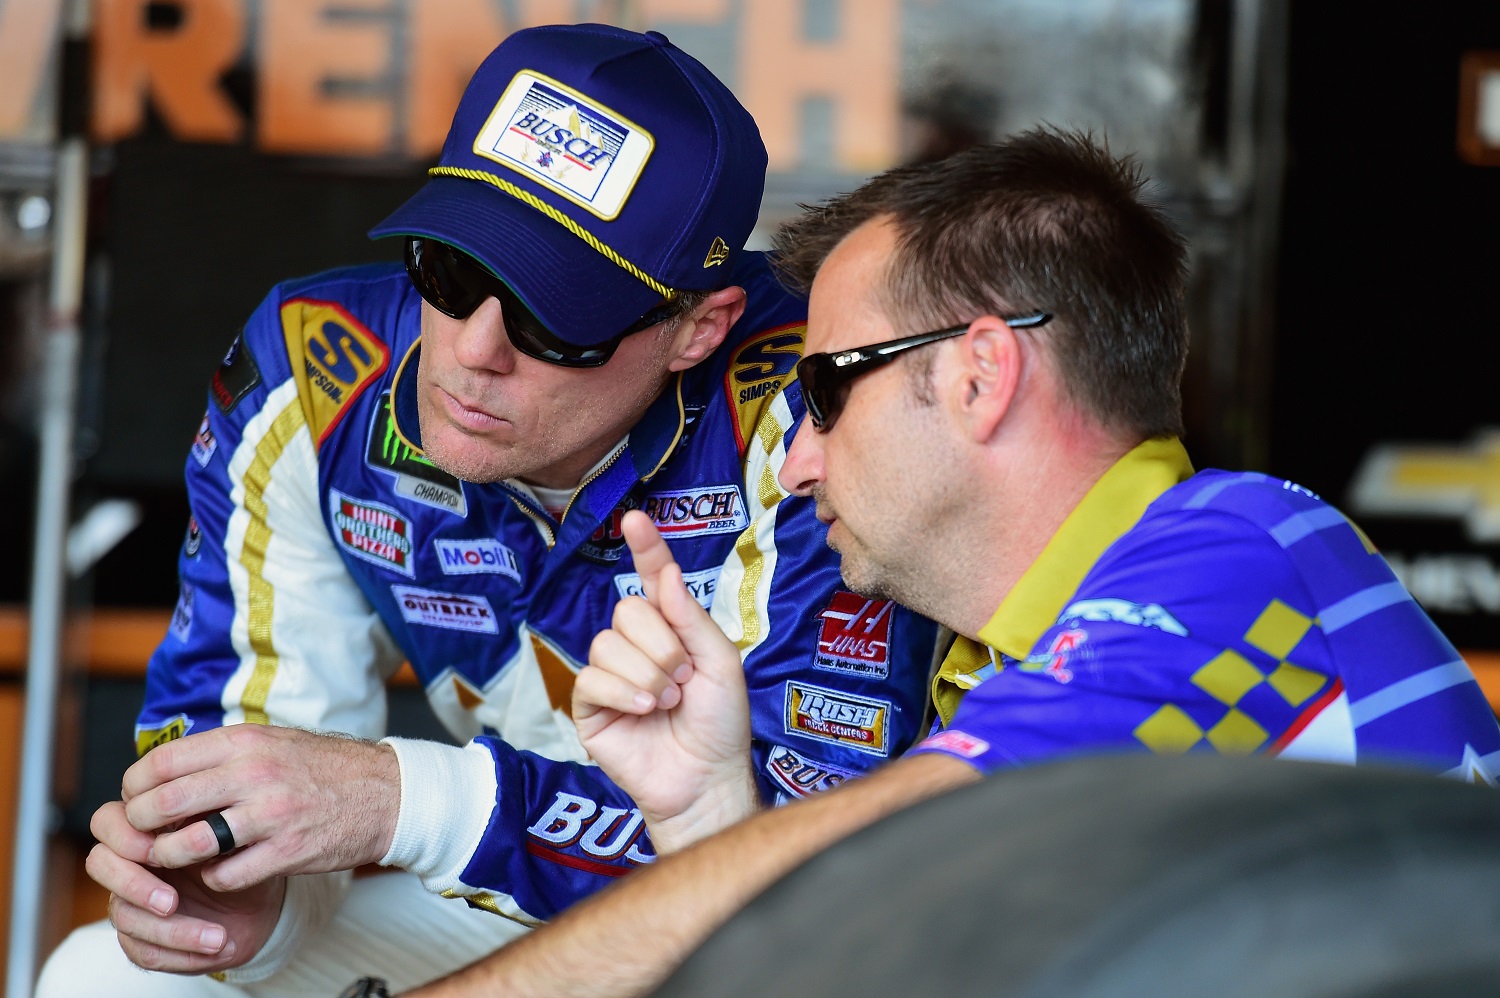 Kevin Harvick and crew chief Rodney Childers have worked together since 2014, but the driver will have to go it alone at Talladega in the fifth NASCAR Cup Series playoff race. | Jared C. Tilton/Getty Images